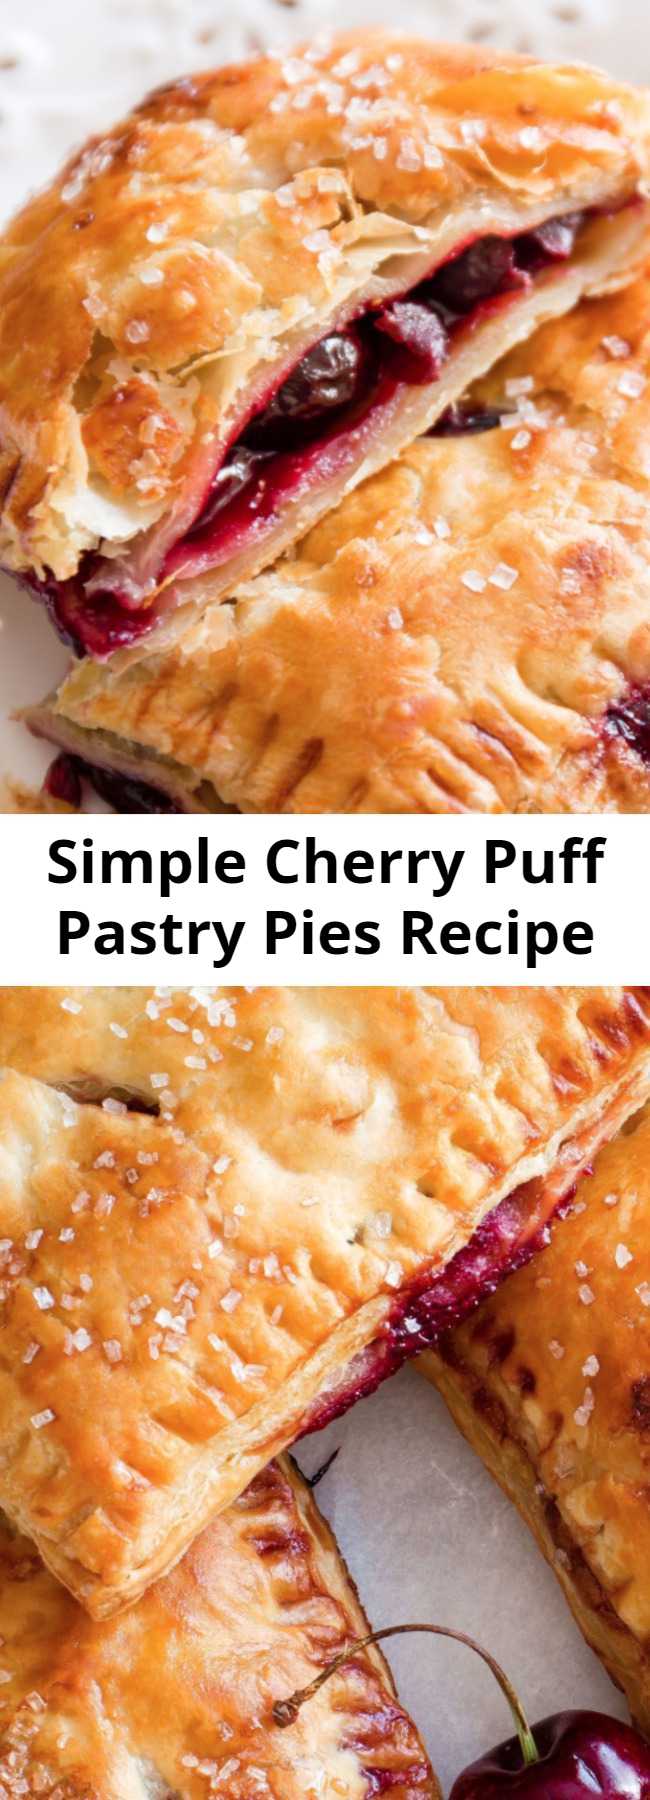 Simple Cherry Puff Pastry Pies Recipe